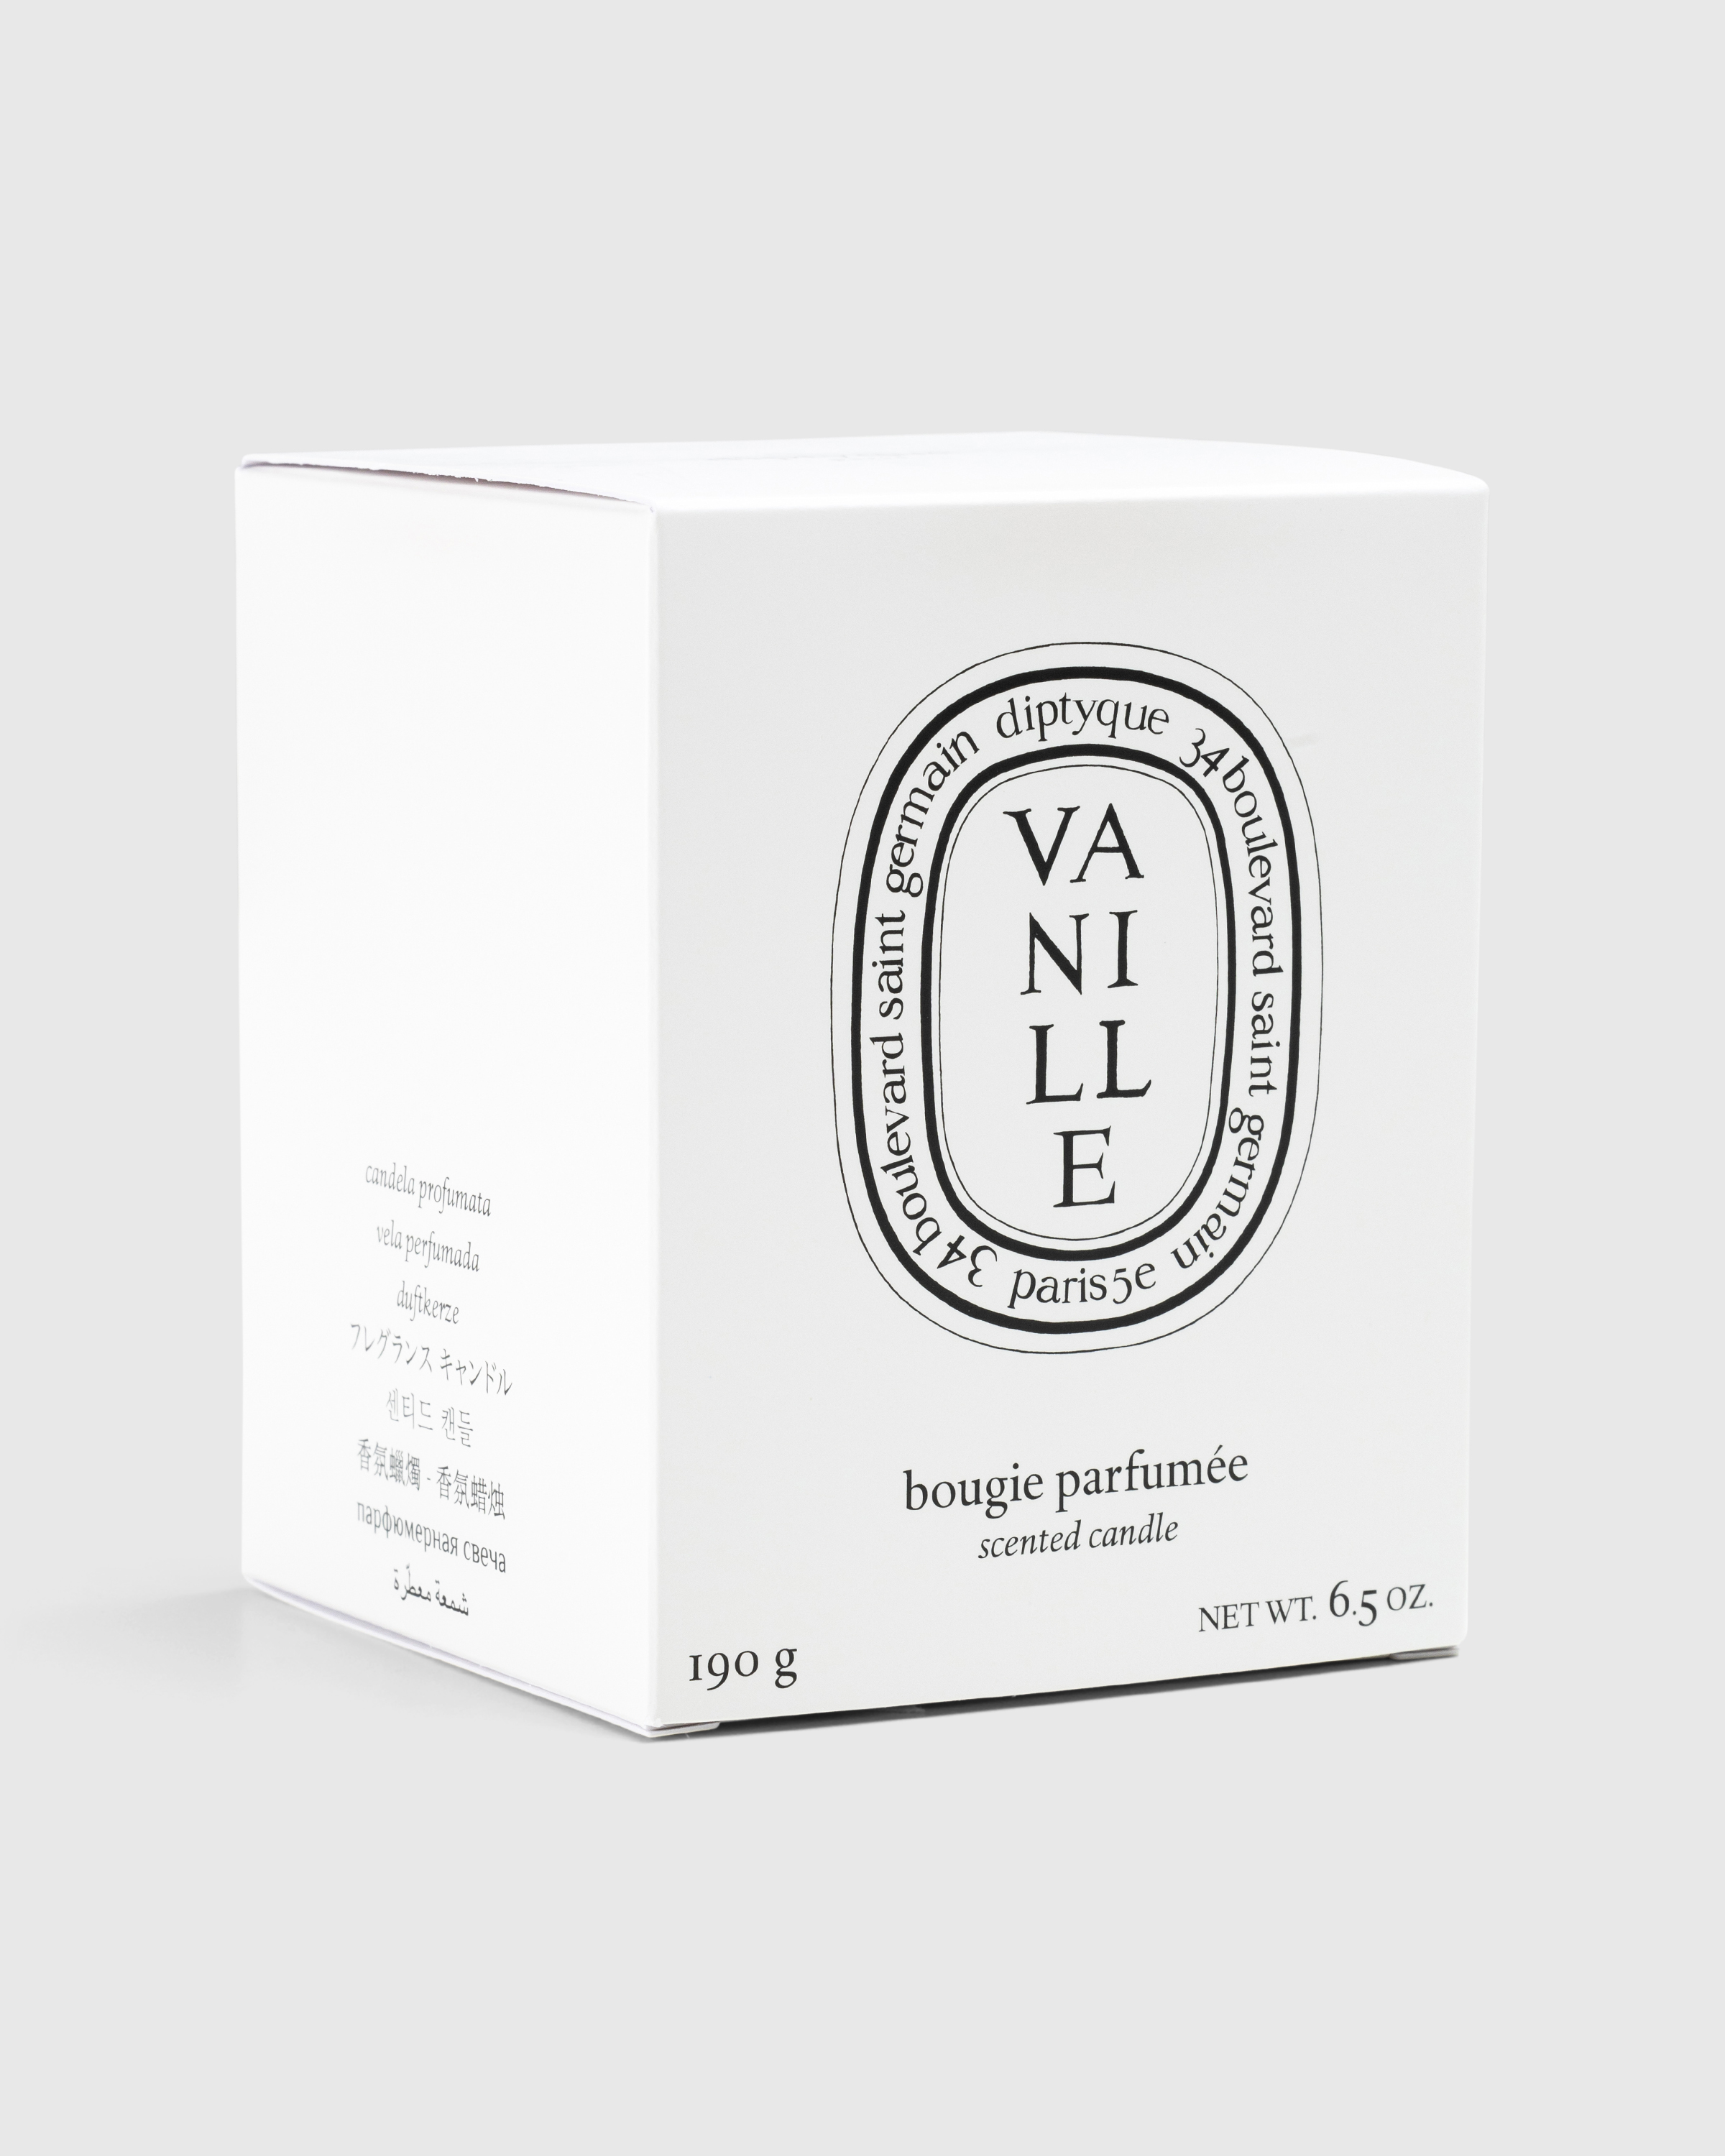 Diptyque – Standard Candle Vanille 190g - Candles & Fragrances - White - Image 3